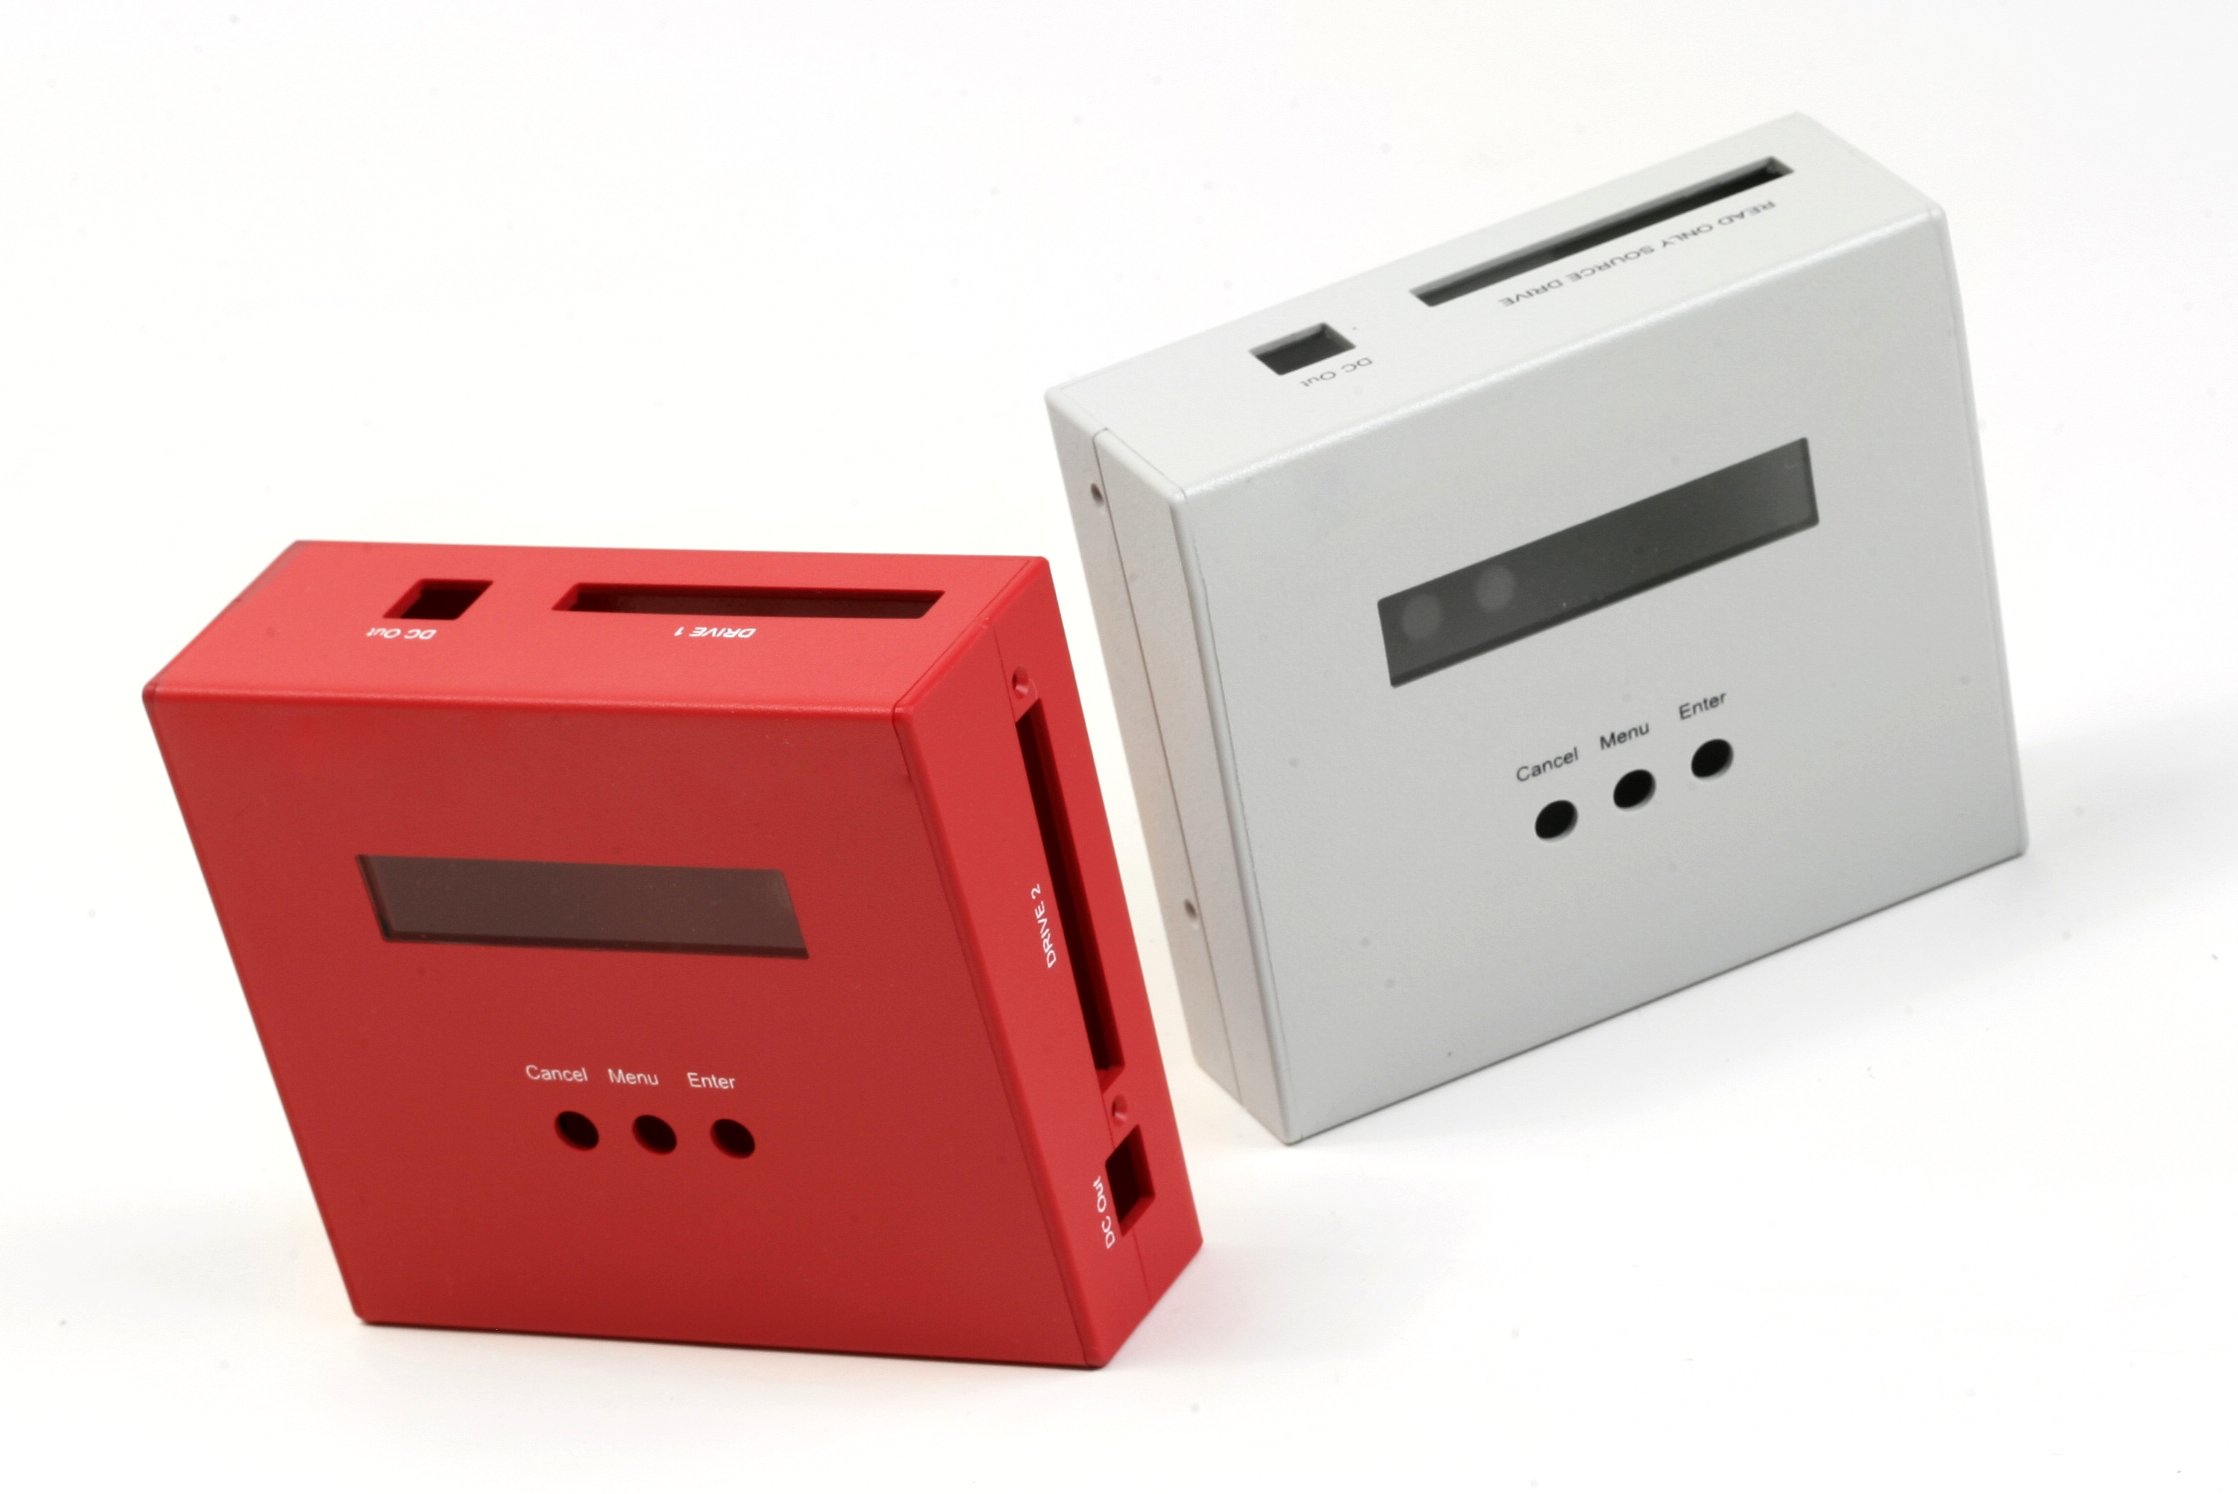 One red and one white custom plastic enclosure